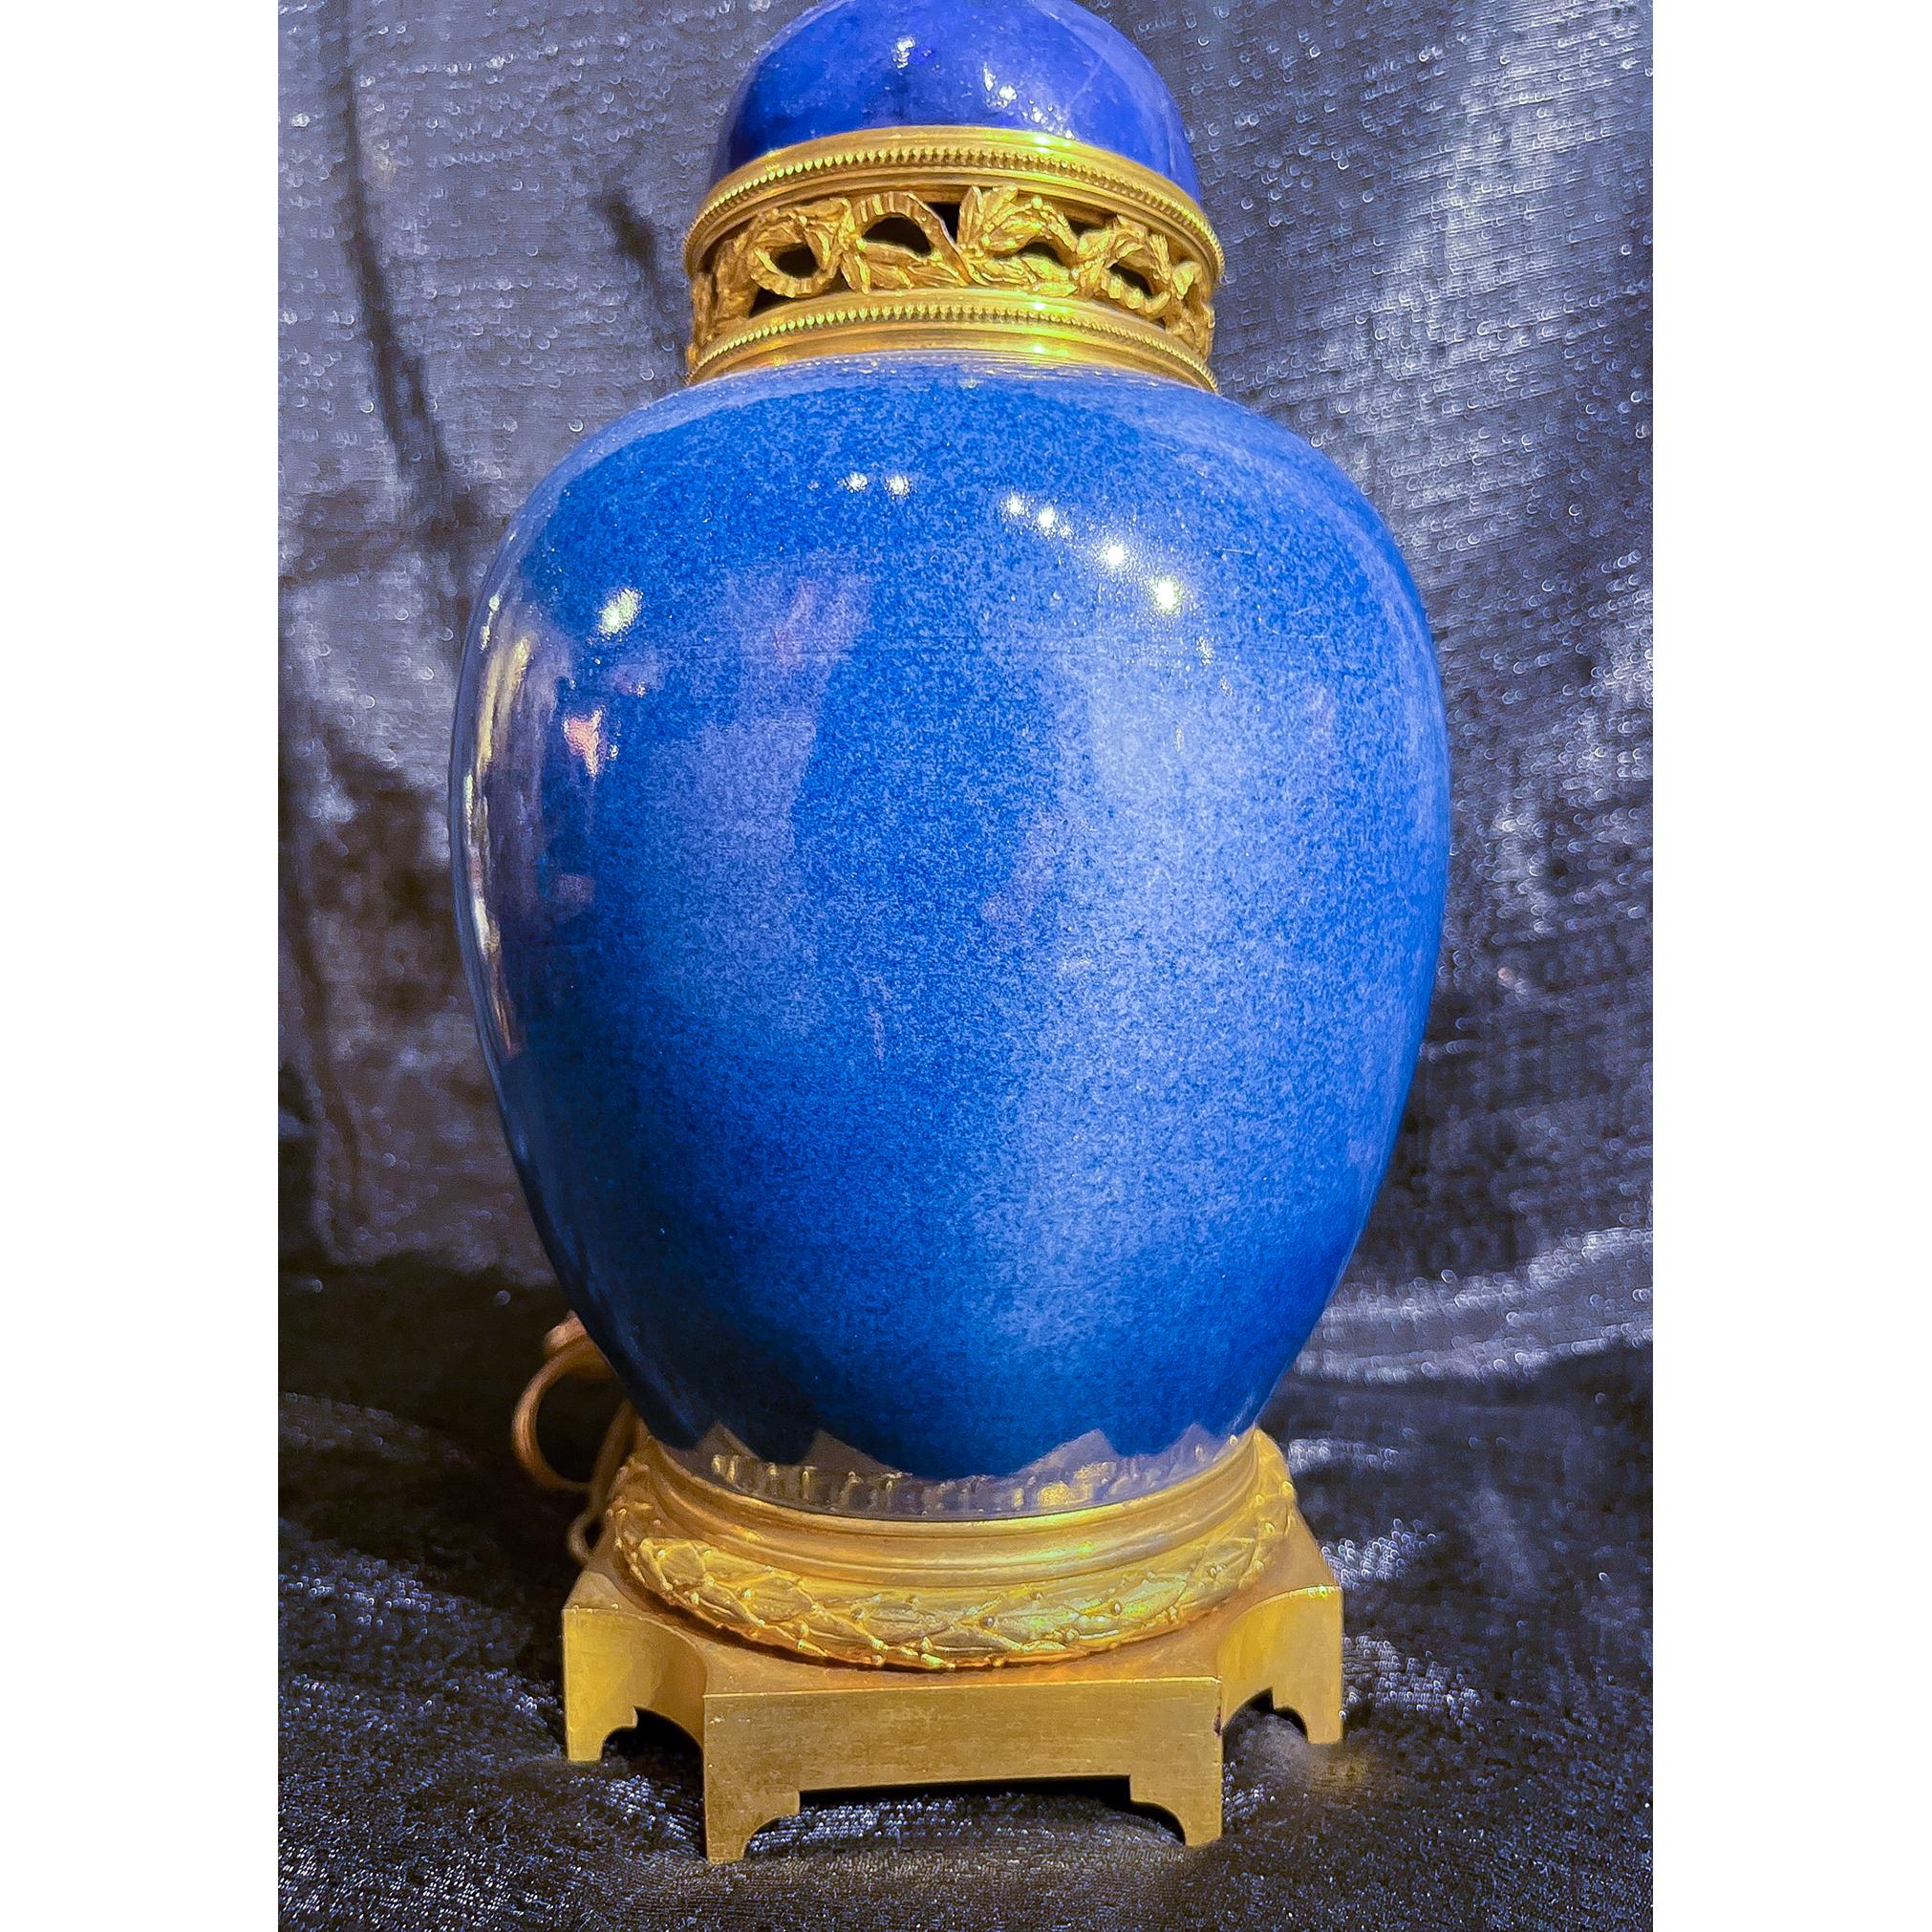 A fine quality pair of French Ormolu-Mounted Chinese Porcelain Vases mounted as lamps in mottled blue-ground glaze. Resting on square ormolu base with garland band and ormolu banded neck with foliage details. Blue is even brighter in